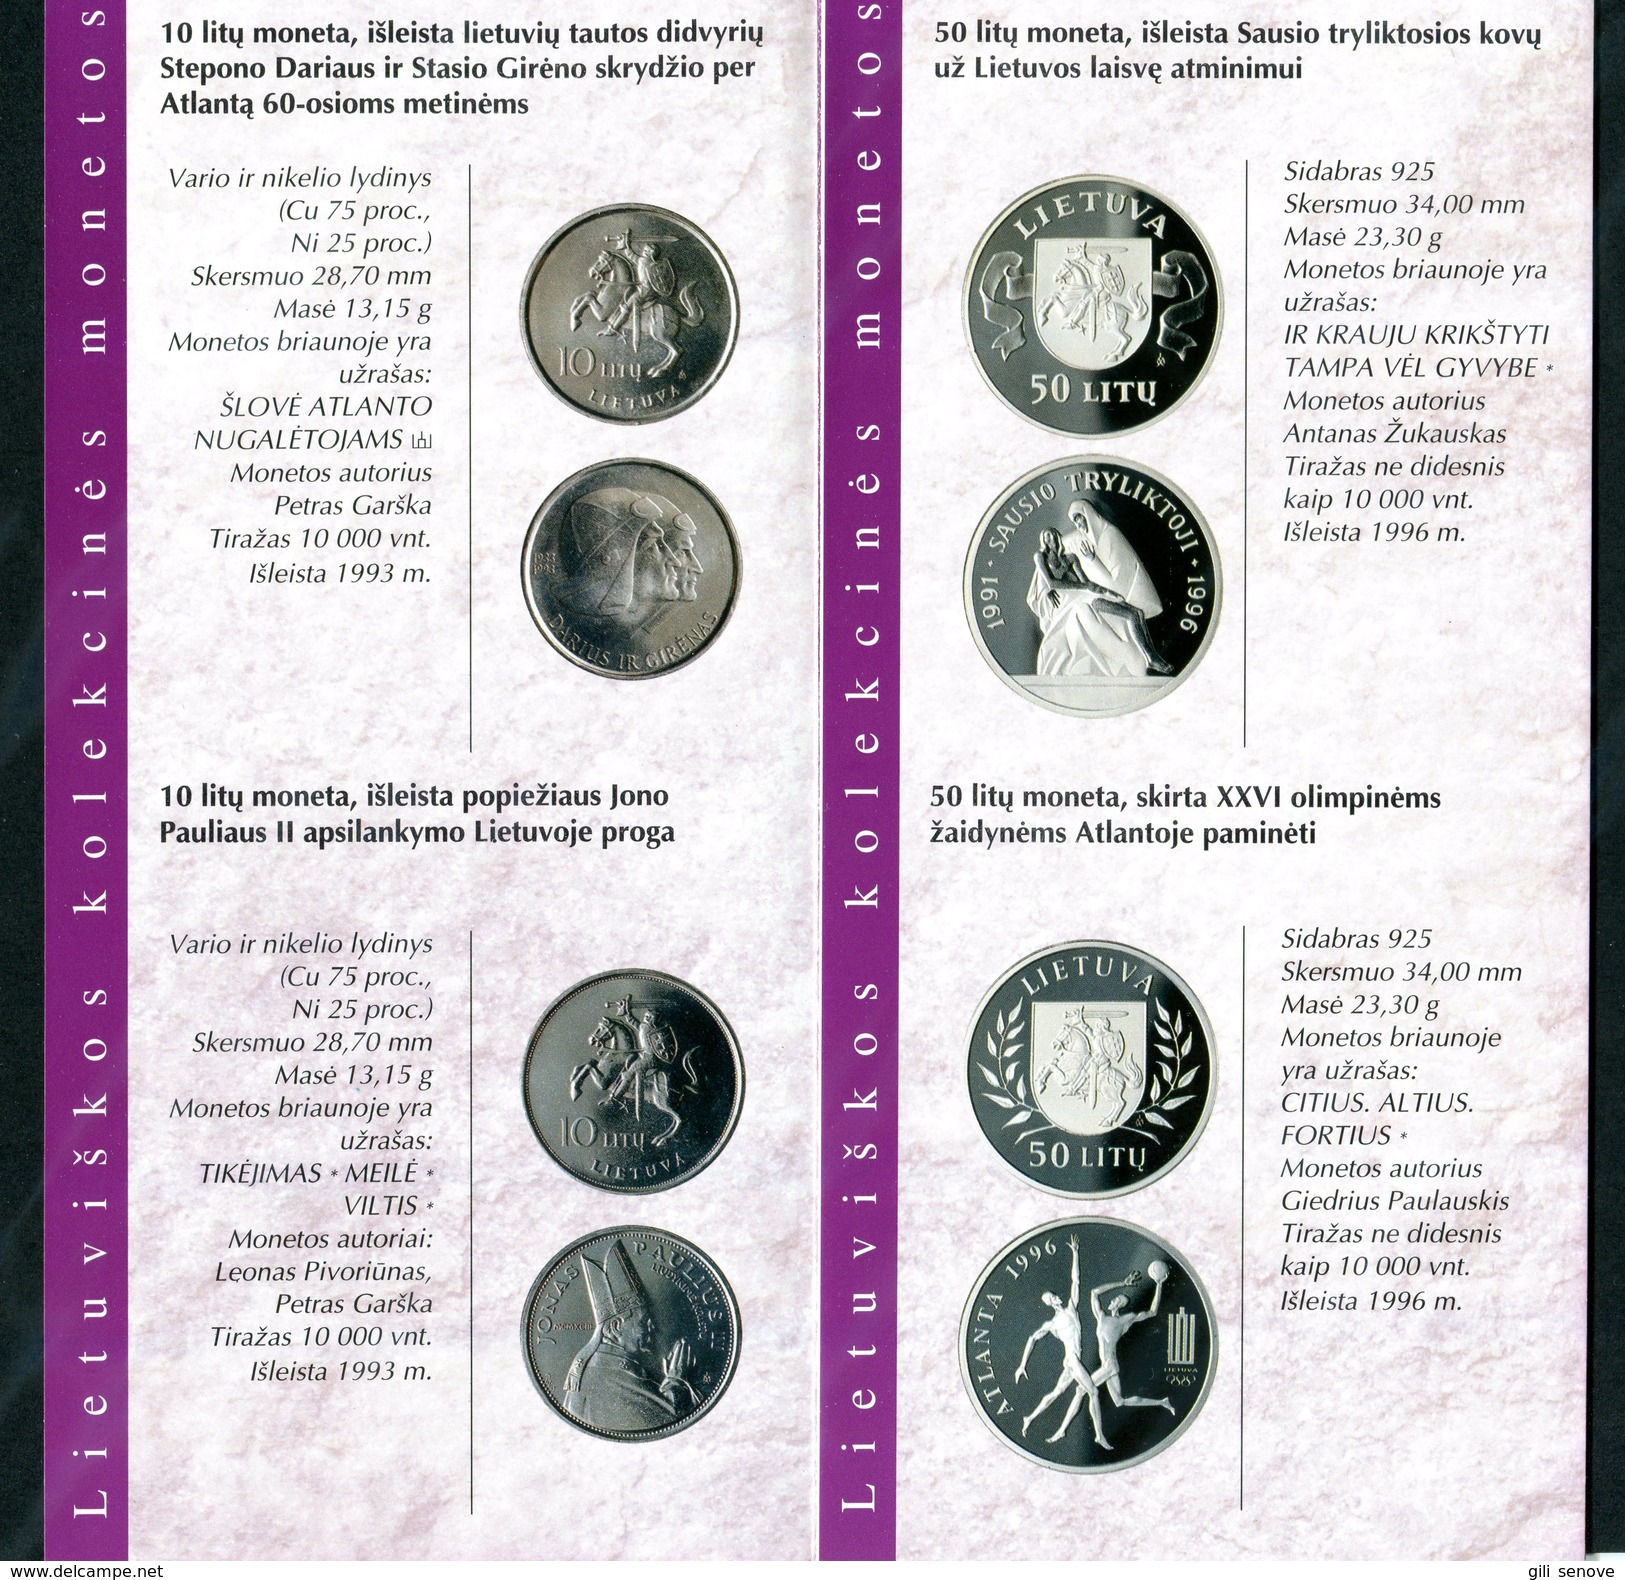 1997 BANK OF LITHUANIA COLLECTORS COINS - BOOKLET - Lithuania